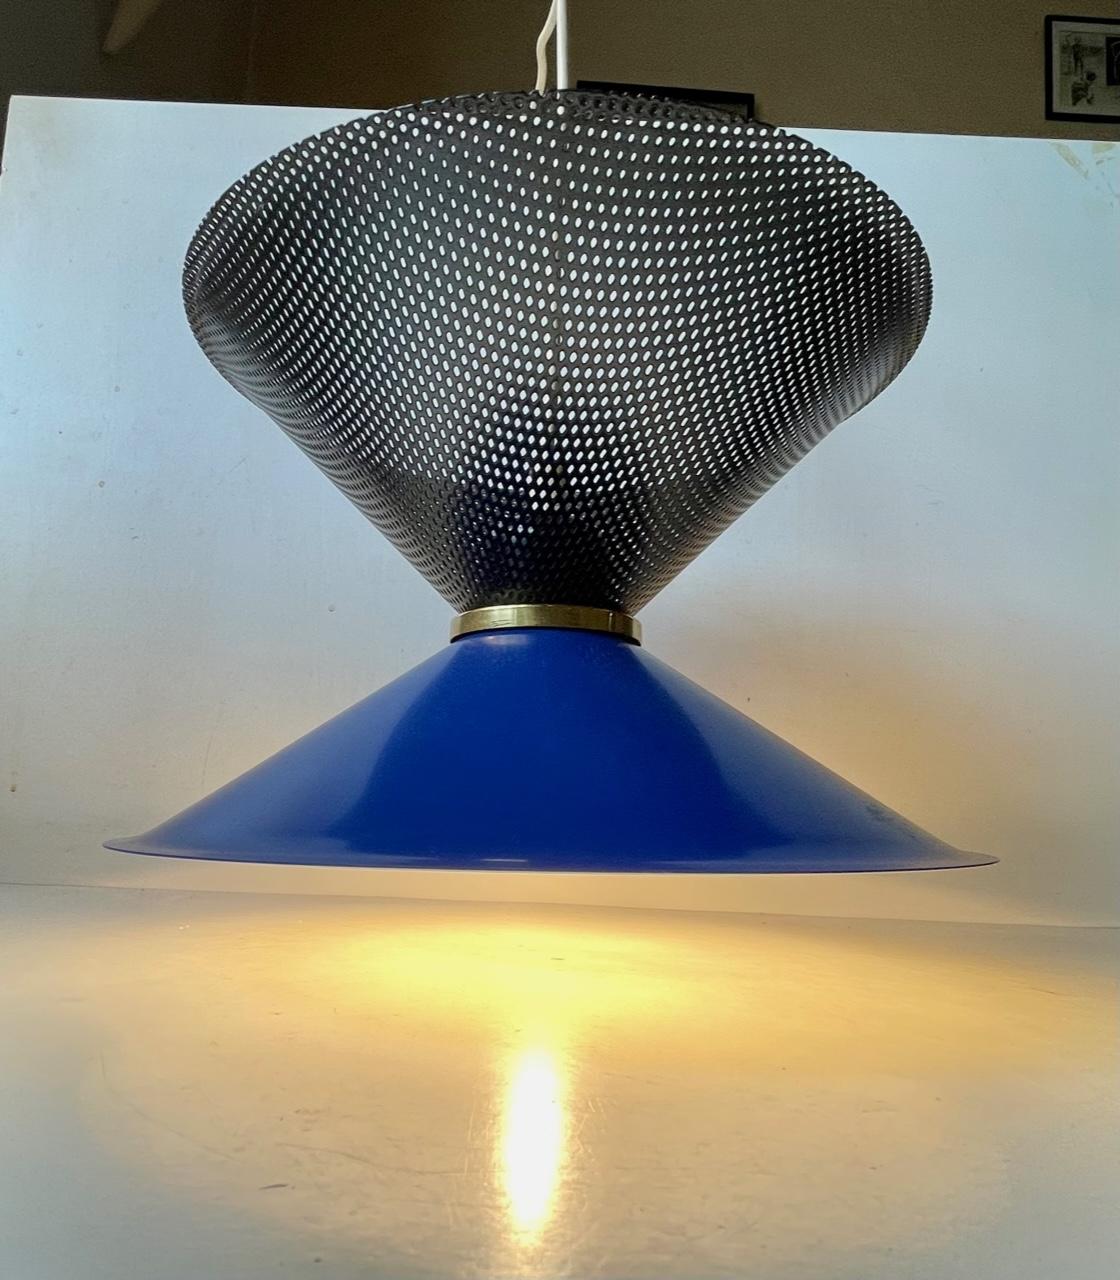 Diablo - hourglass shaped hanging light with center brass disc. The bottom shade in made from blue enameled aluminium and the top from piercet steel. Anonymous Italian maker/design - circa 1970-80. In the Style of Stilnovo and Svend Aage